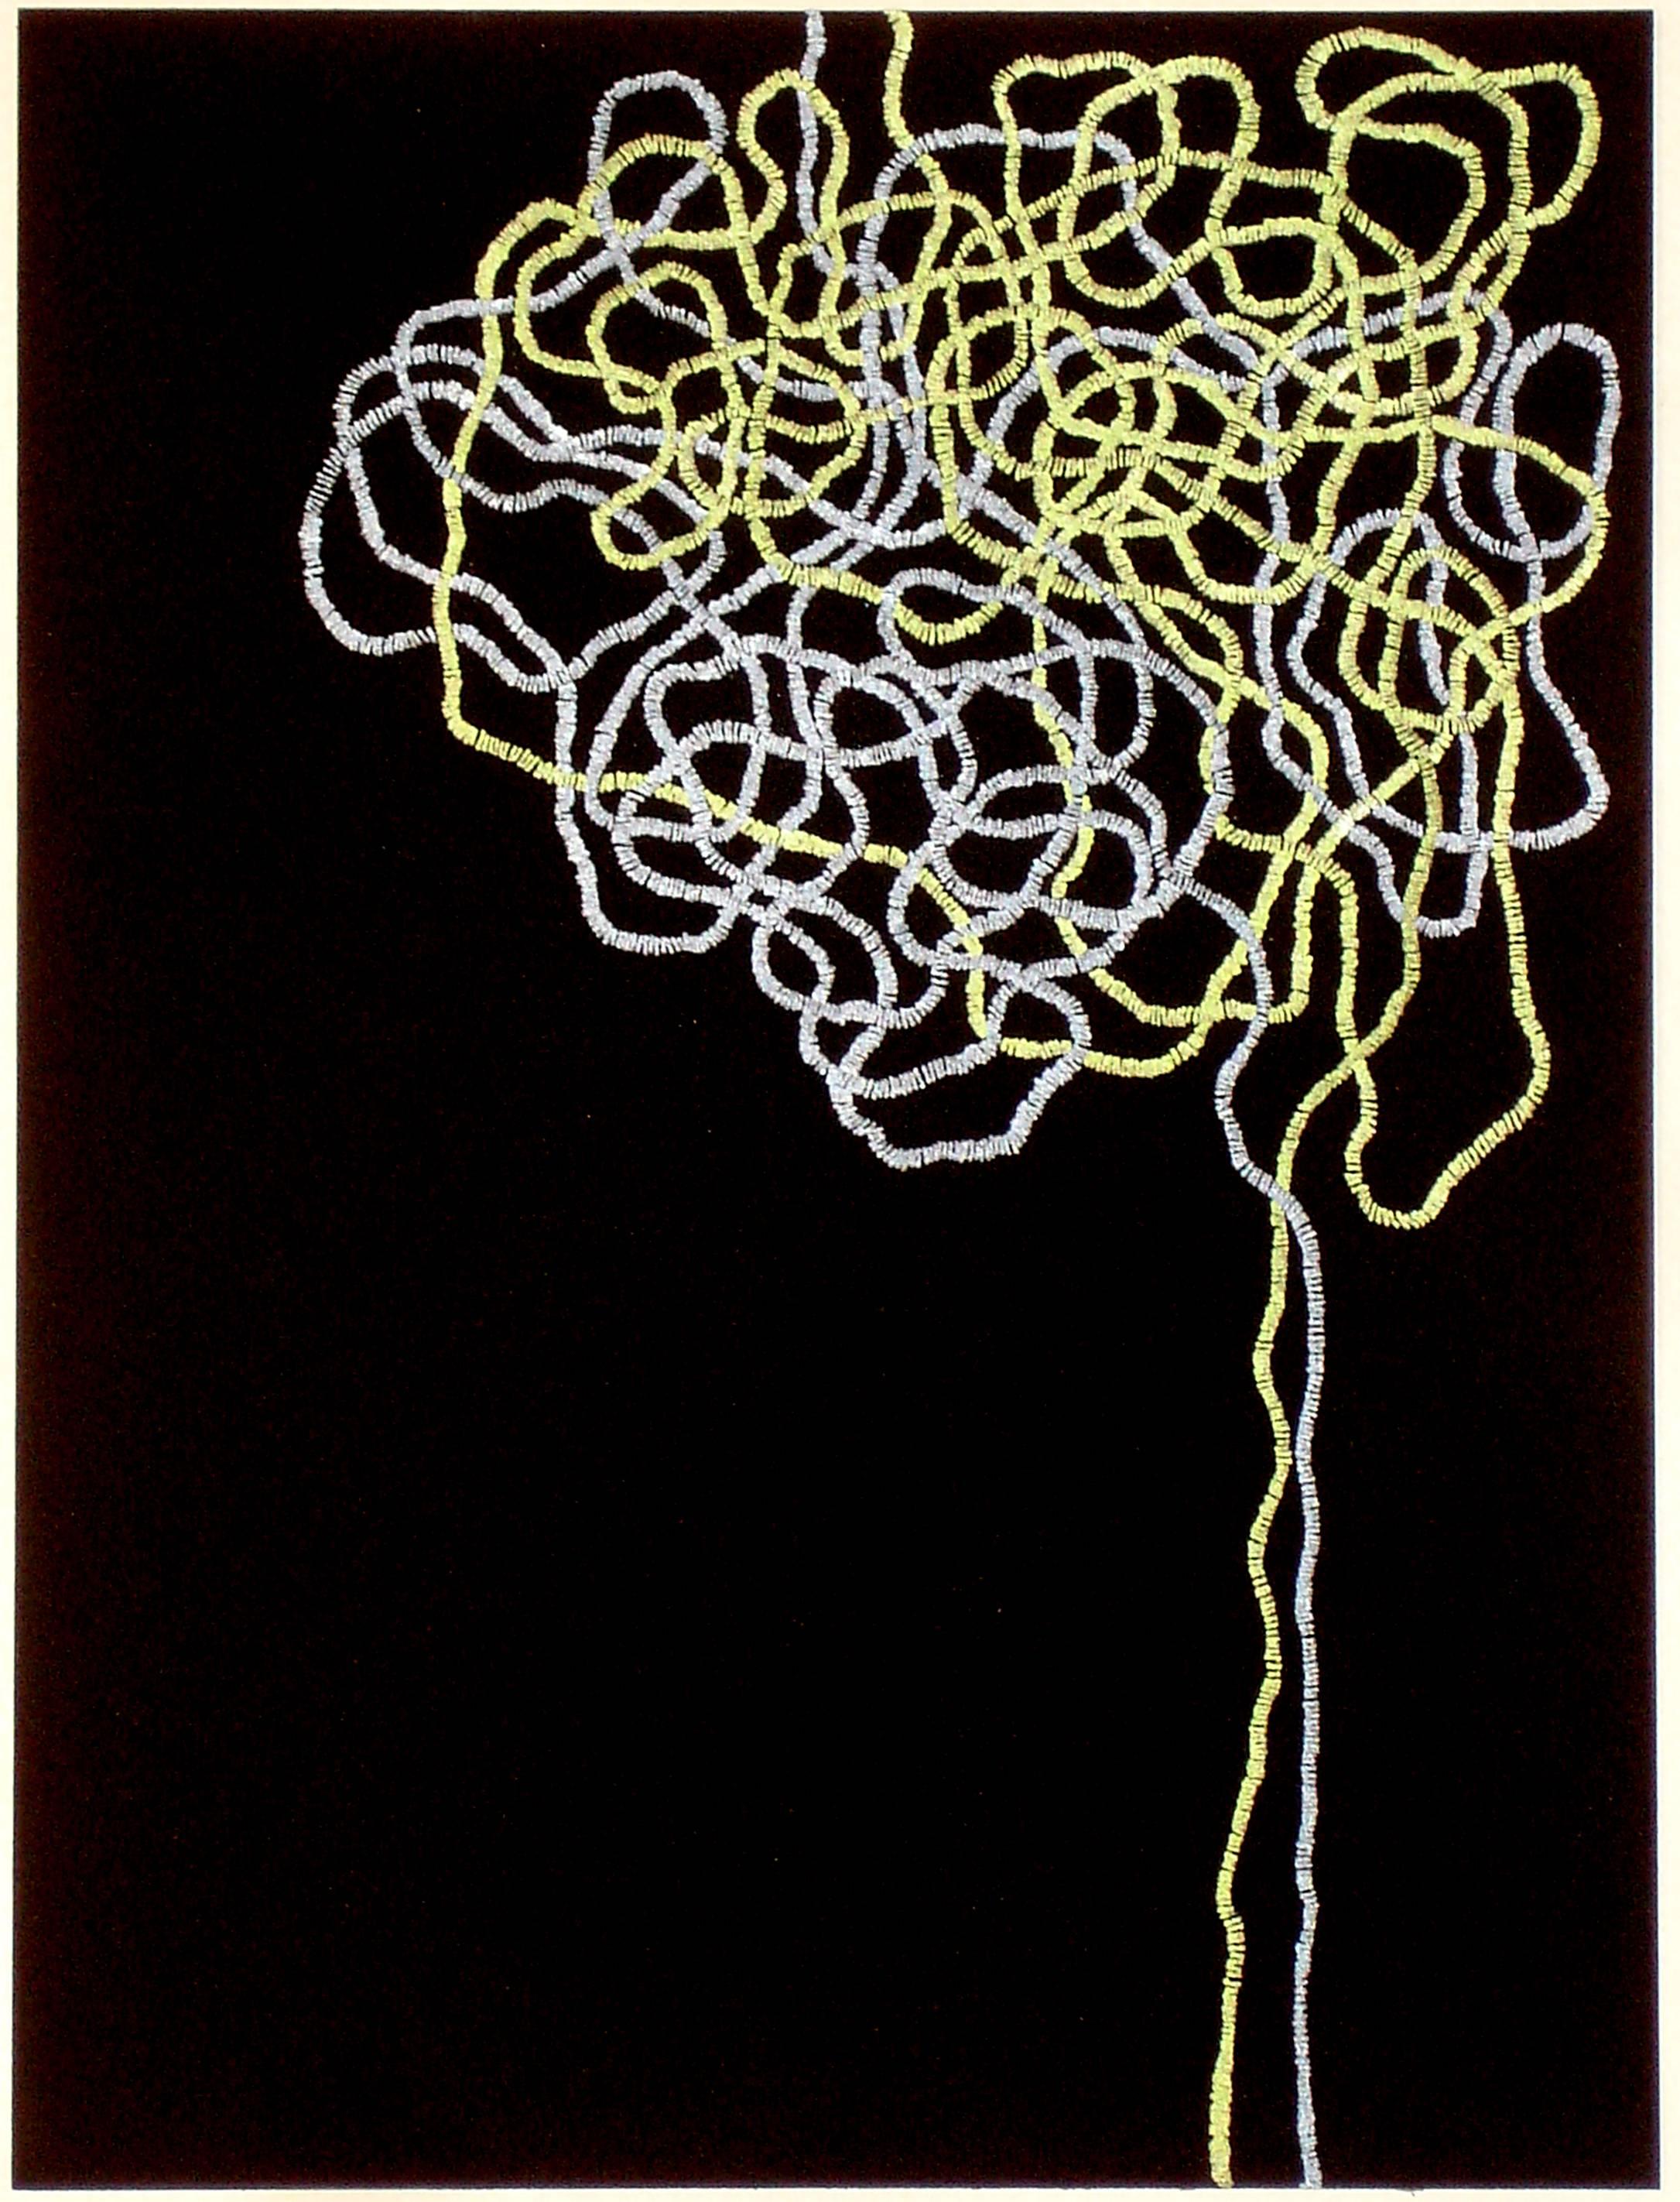 Robert Jack Abstract Drawing - An Unwound Tangle of Code